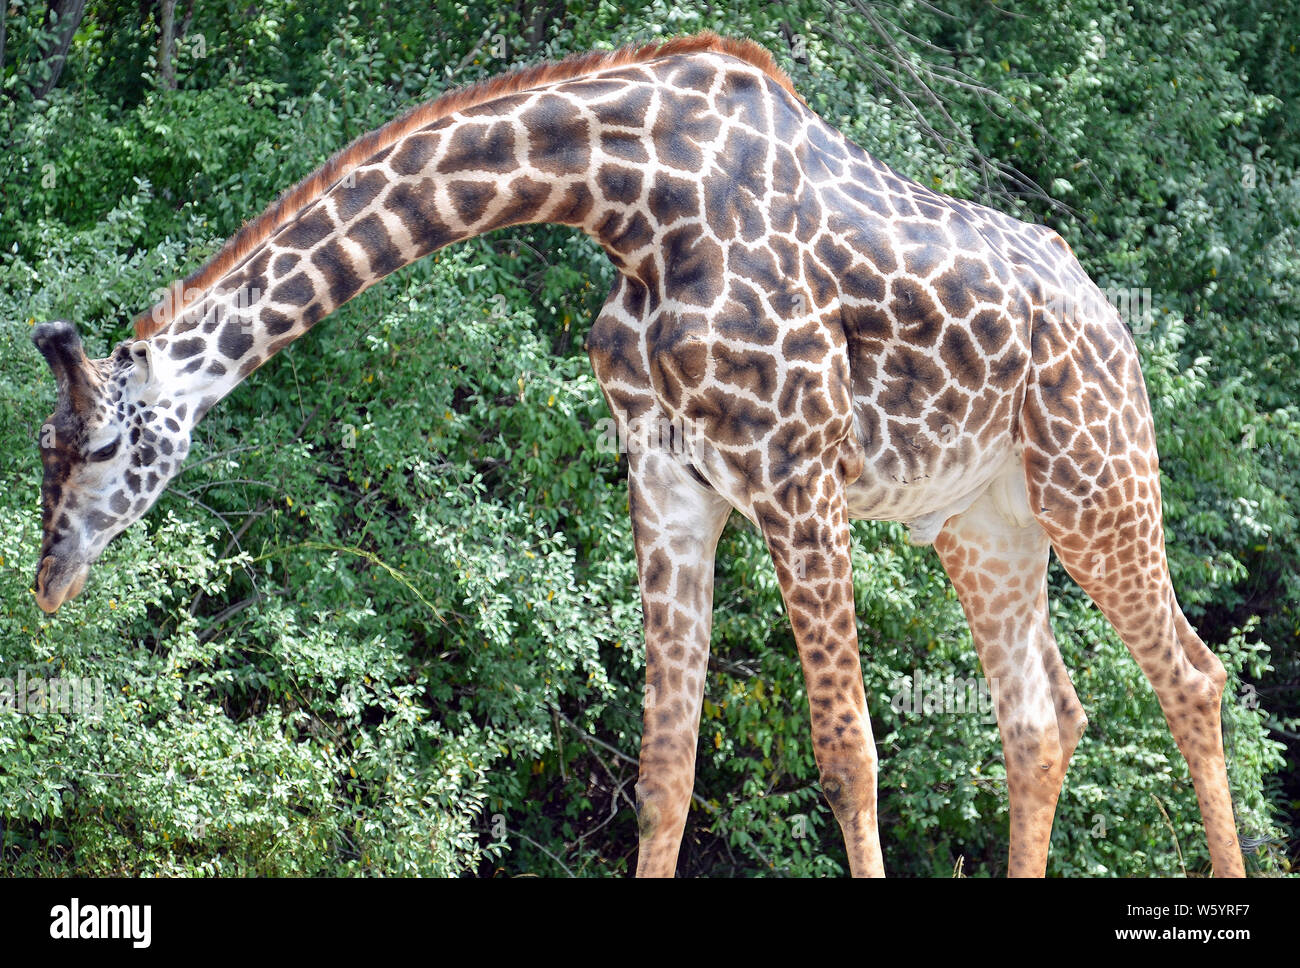 Large adult male giraffe with neck bent down, big black eyes, long brown and black nobs on head, black and chestnut starburst spots, and creamy underb Stock Photo